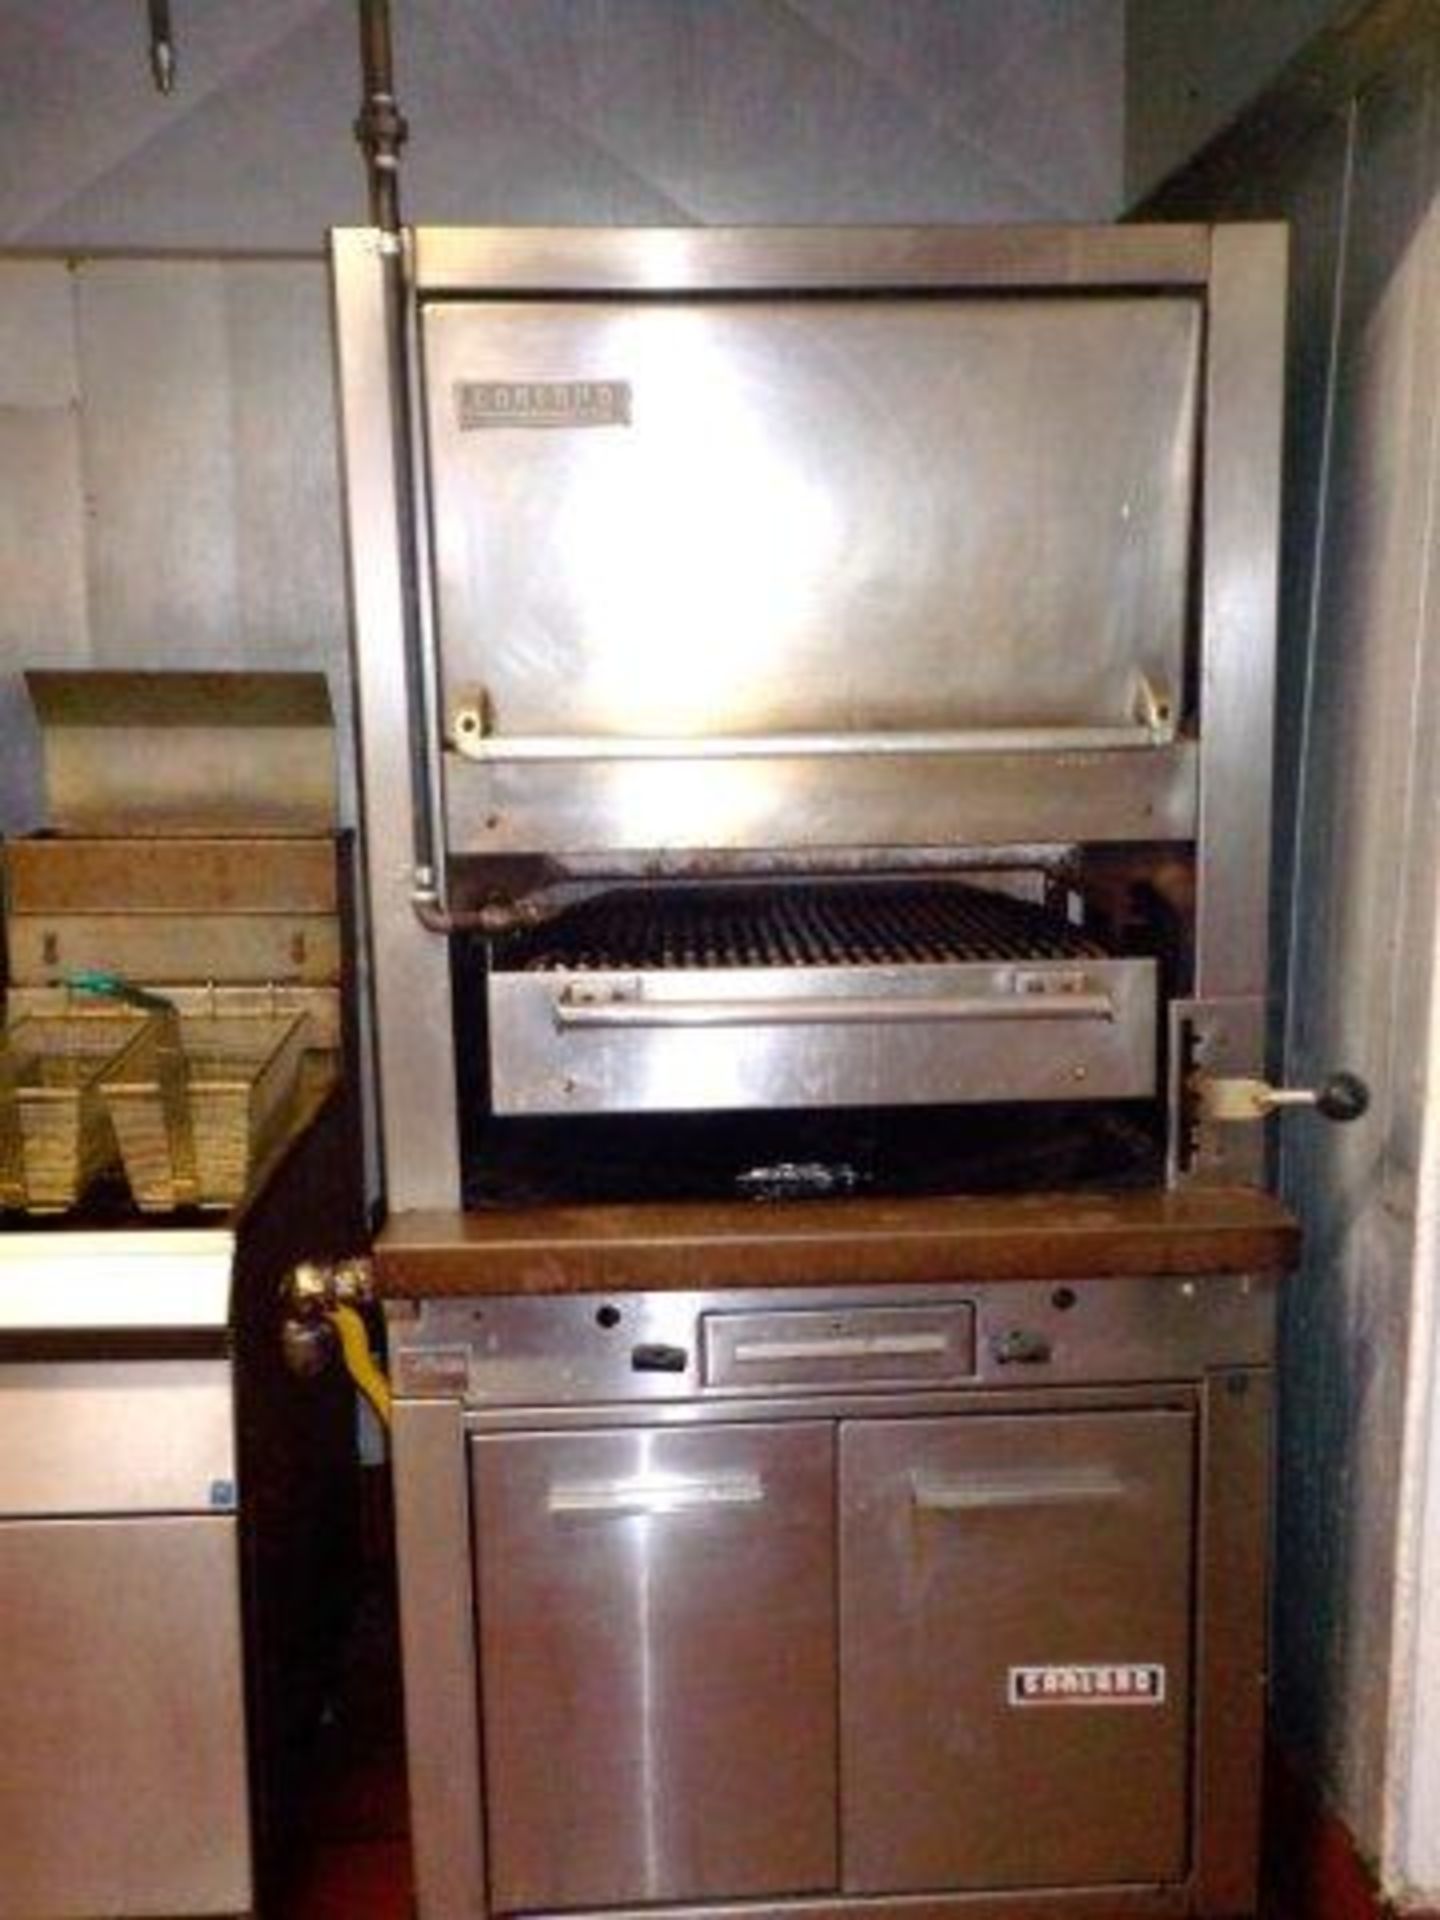 BULK BID: The Real Estate & Restaurant Equipment/Fixtures as a Whole. Lots 1 & 2. - Image 12 of 32